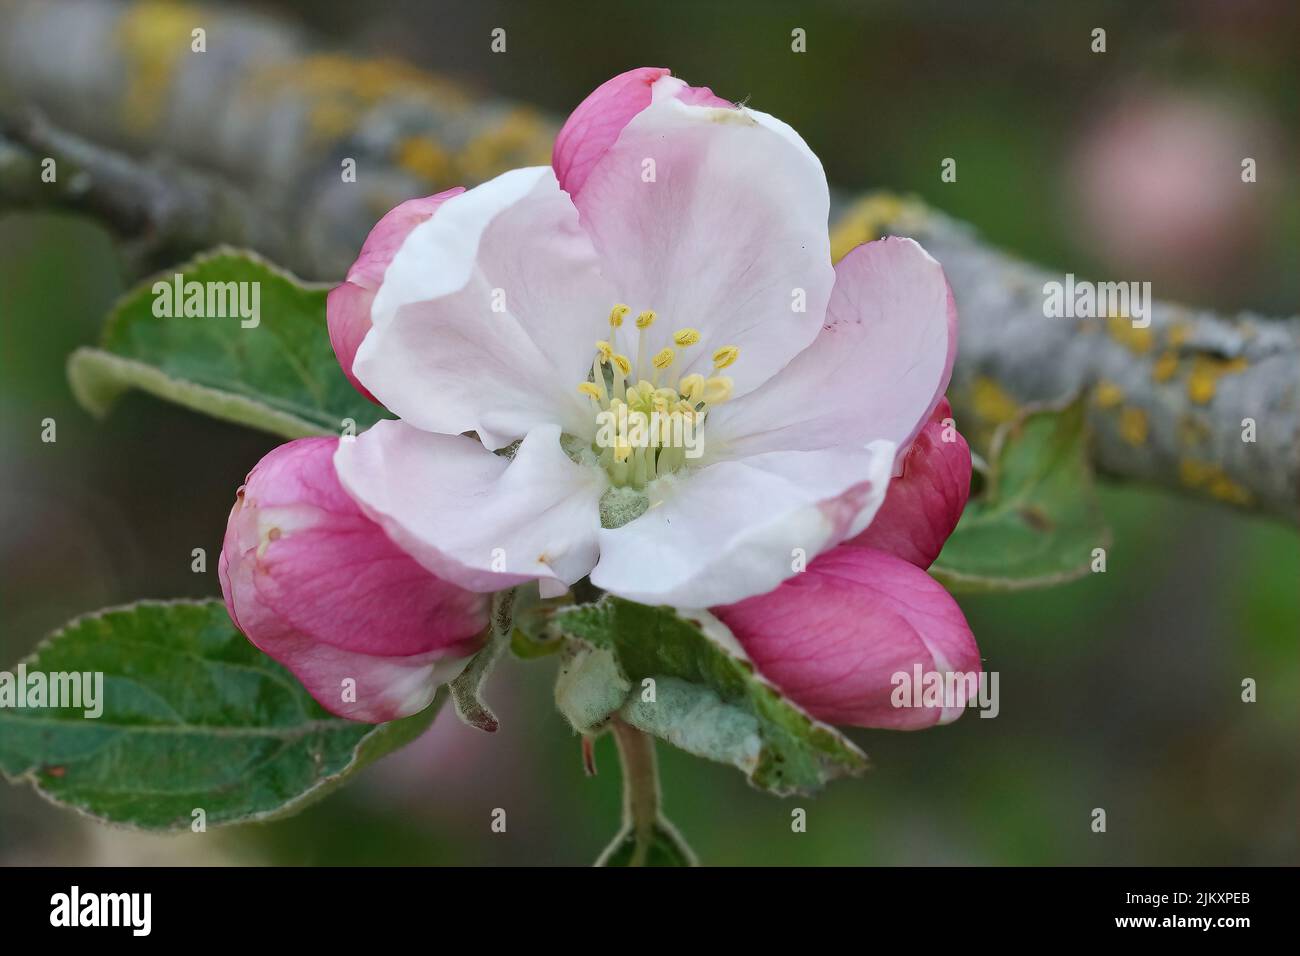 Closeup on the colorful pink and white blossoming European crab apple, Malus sylvestris Stock Photo